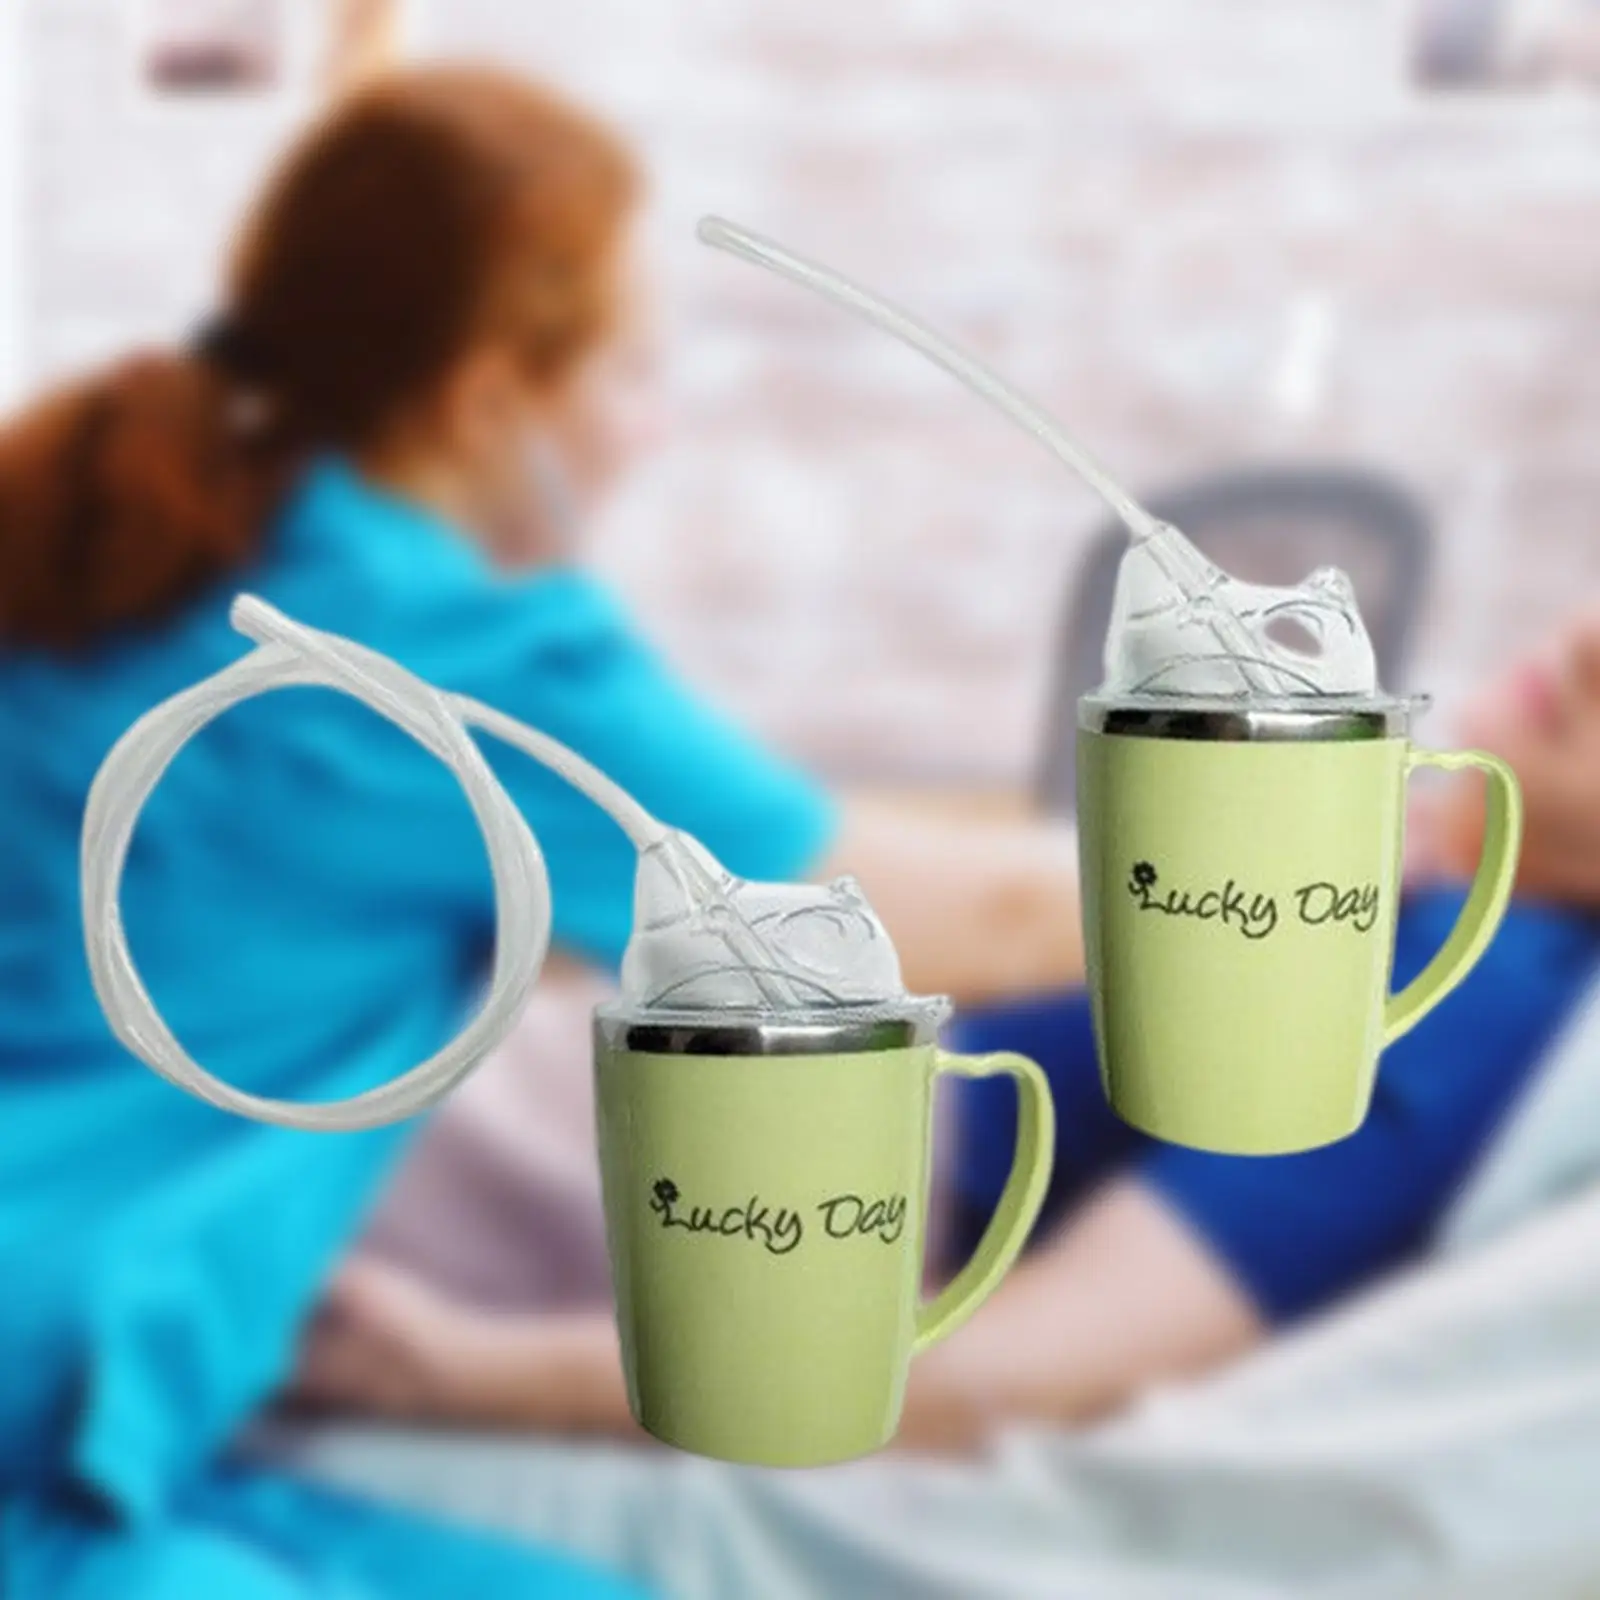  3pcs Patient Cup Spill Cup Drinking Cup Convalescent Feeding  Cup Straw Cup Porridge Soup Cup No Spill Feeding Cup Adult Sippy Cups  Drinking Cup Anti-spill Elder Plastic